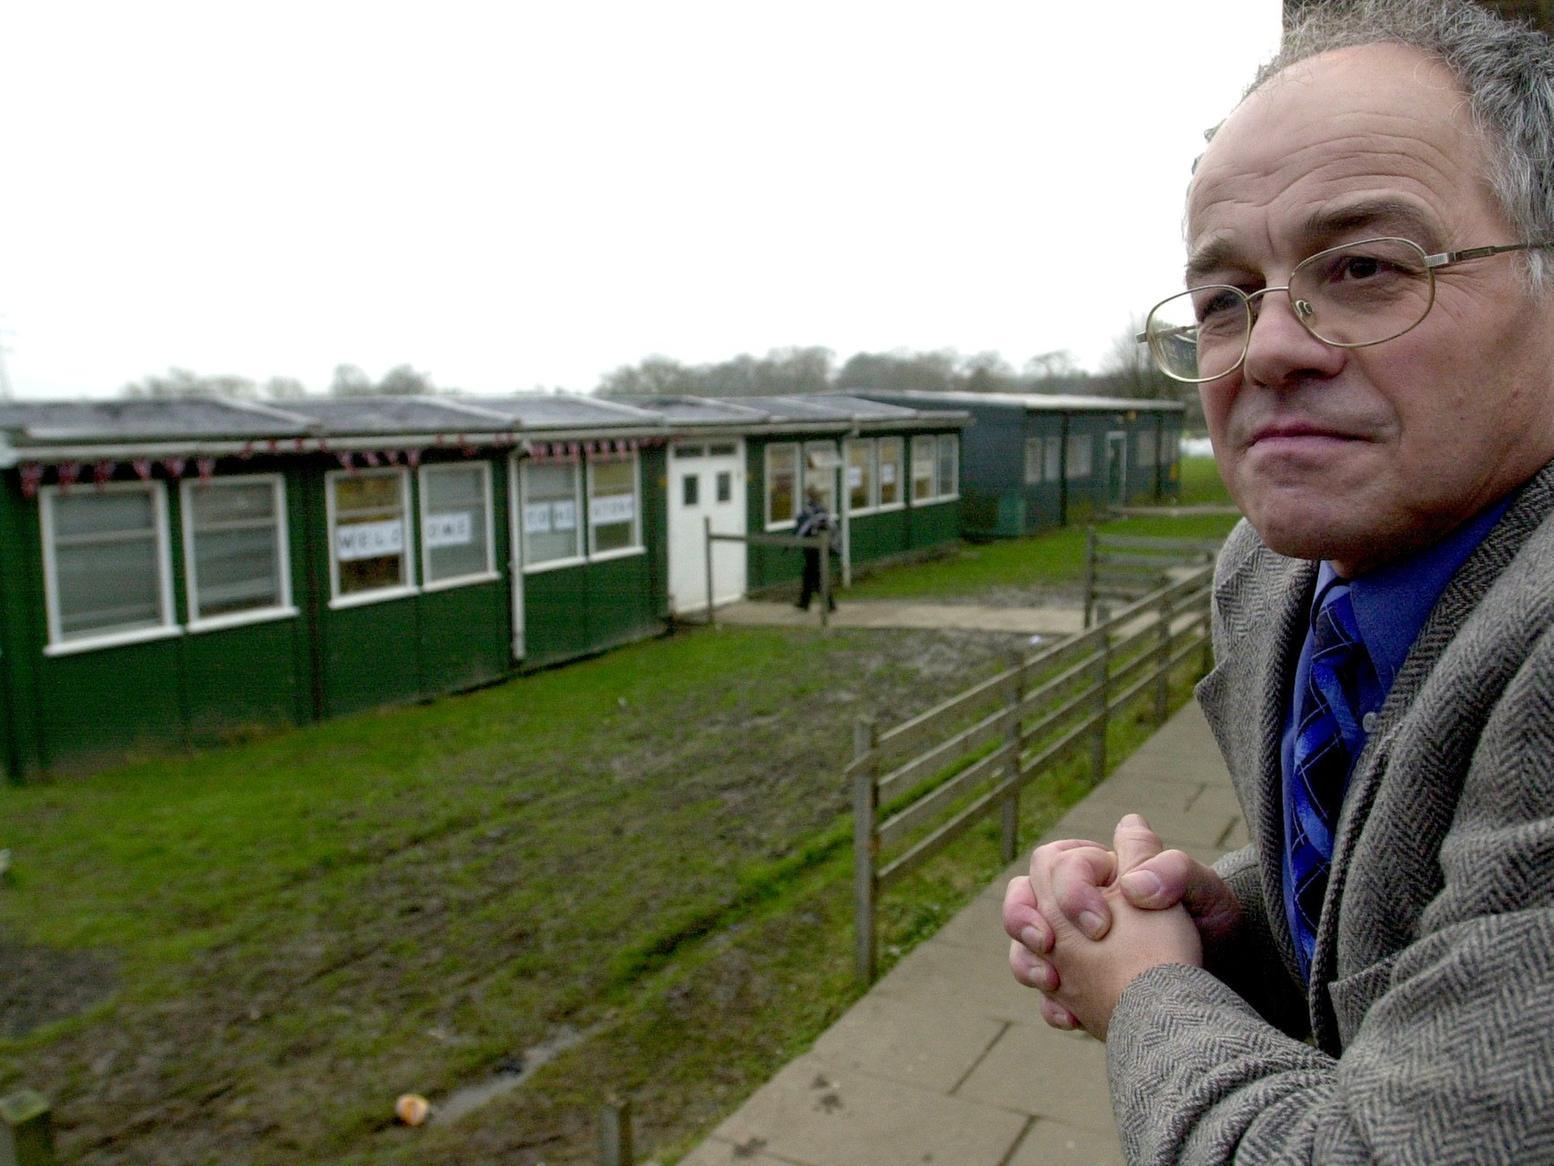 Priesthorpe School head teacher Clive Pickles looks across an area where new classrooms were going to be built,.